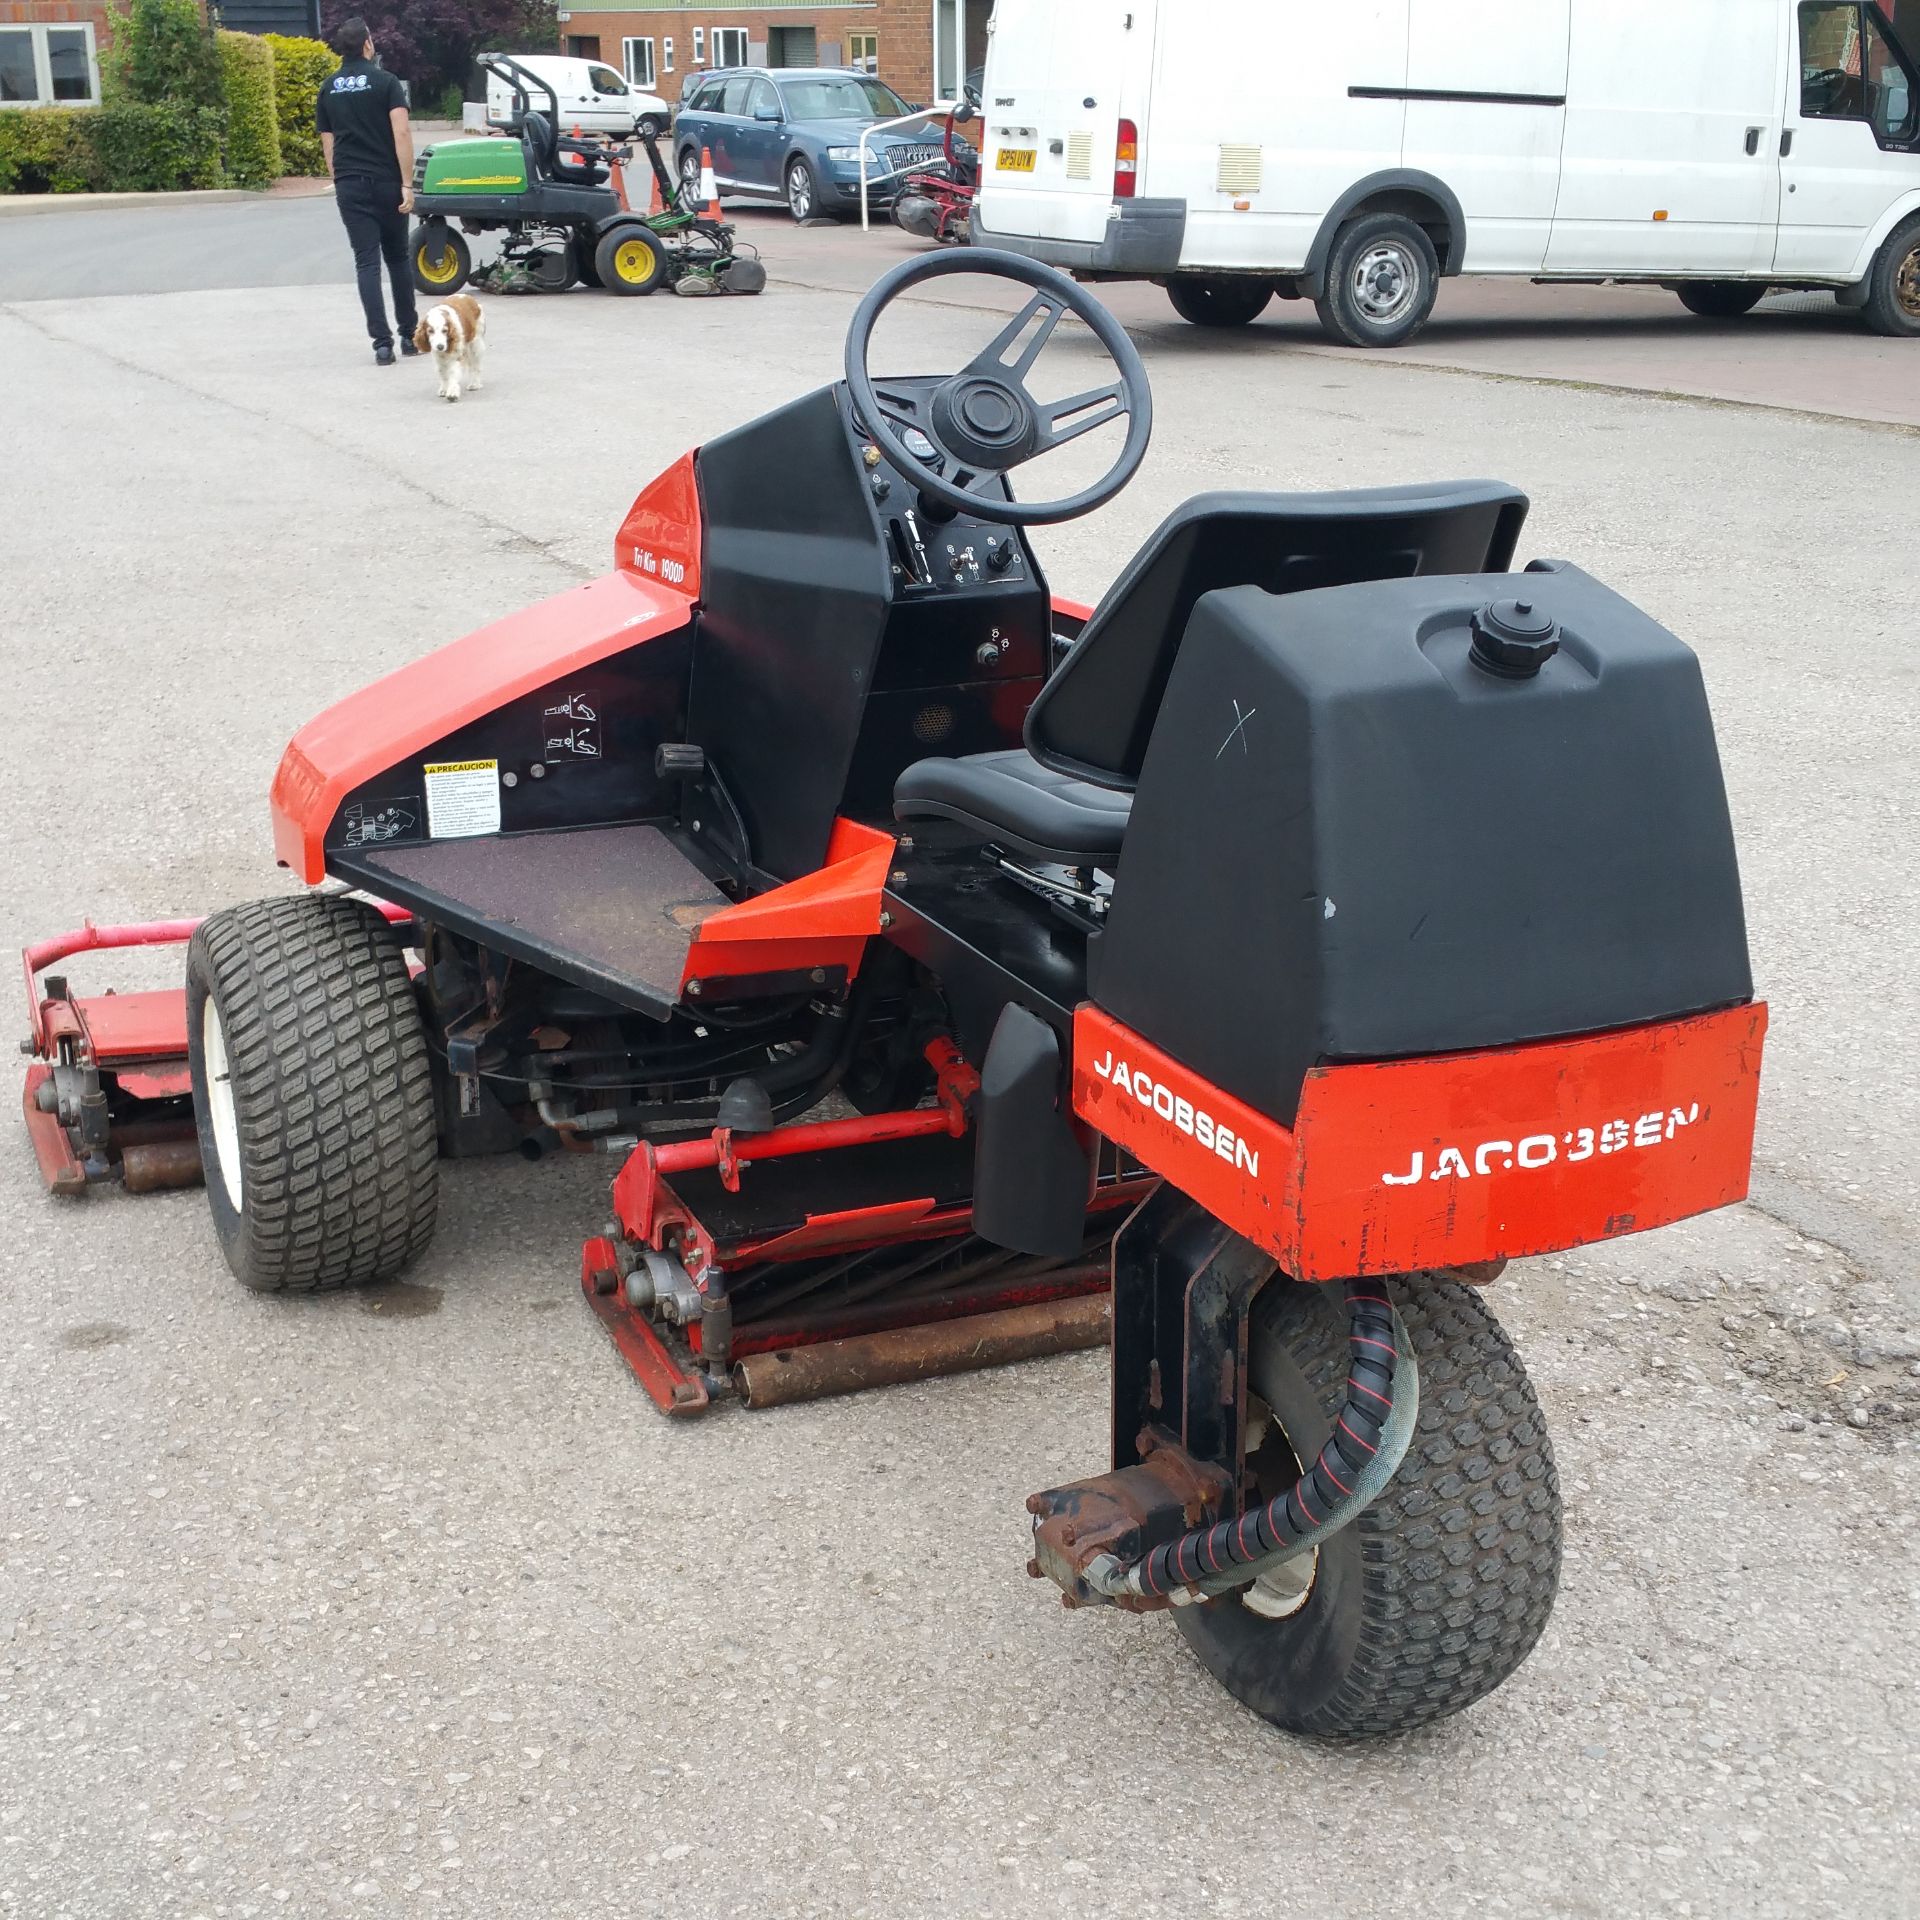 Jacobsen 1900D mower   Triple cylinder   3 cylinder diesel   Hydraulic lift   Hydrostatic drive - Image 2 of 5